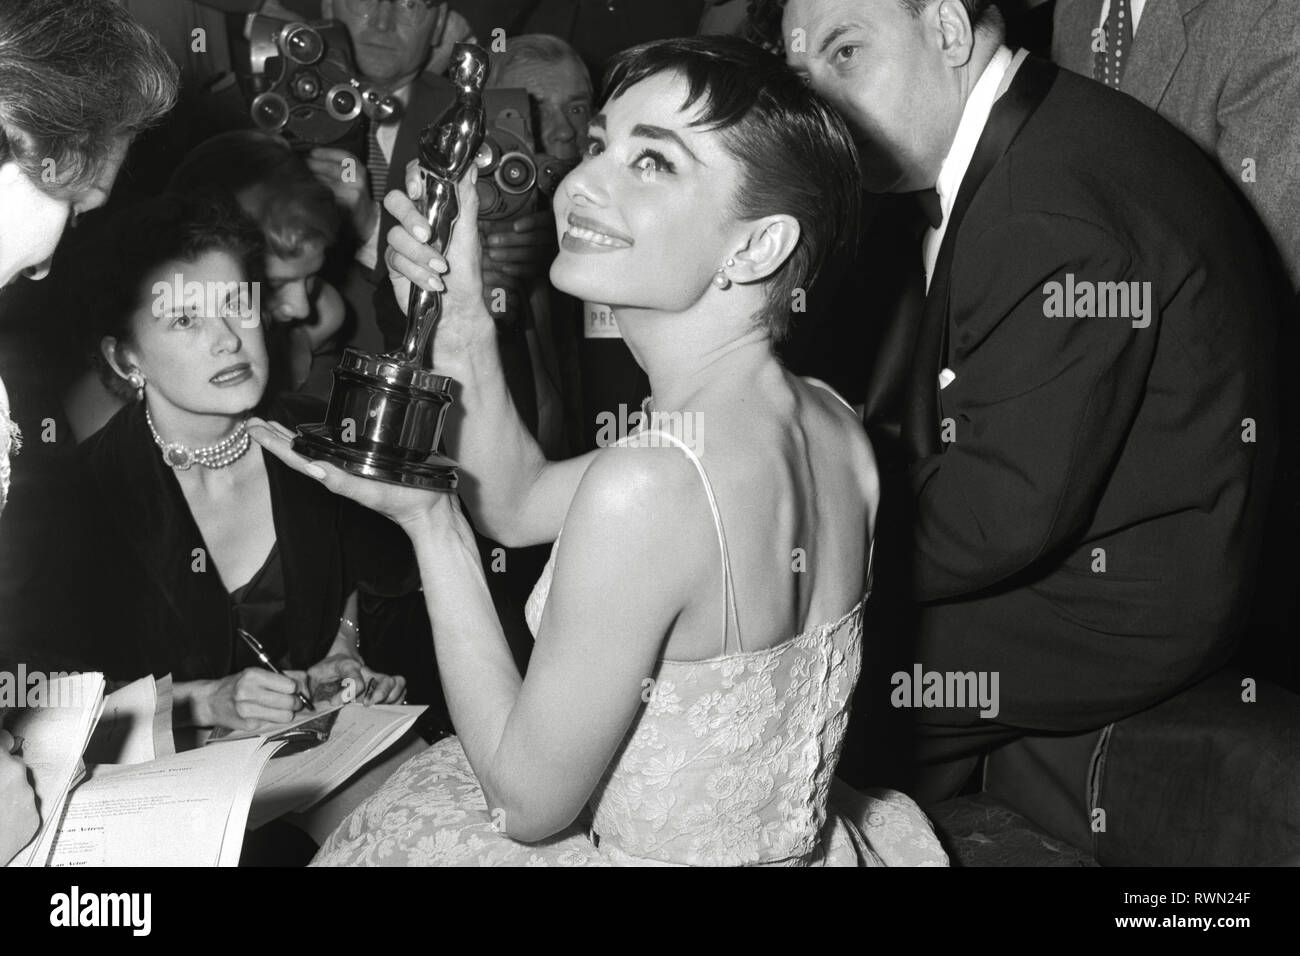 Audrey Hepburn wearing a white floral dress by Hubert de Givenchy at the 26th Annual Academy Awards held at the NBC Century Theatre in New York City on March 25, 1954. Hepburn won best actress for 'Roman Holiday'  File Reference # 33751 482THA Stock Photo